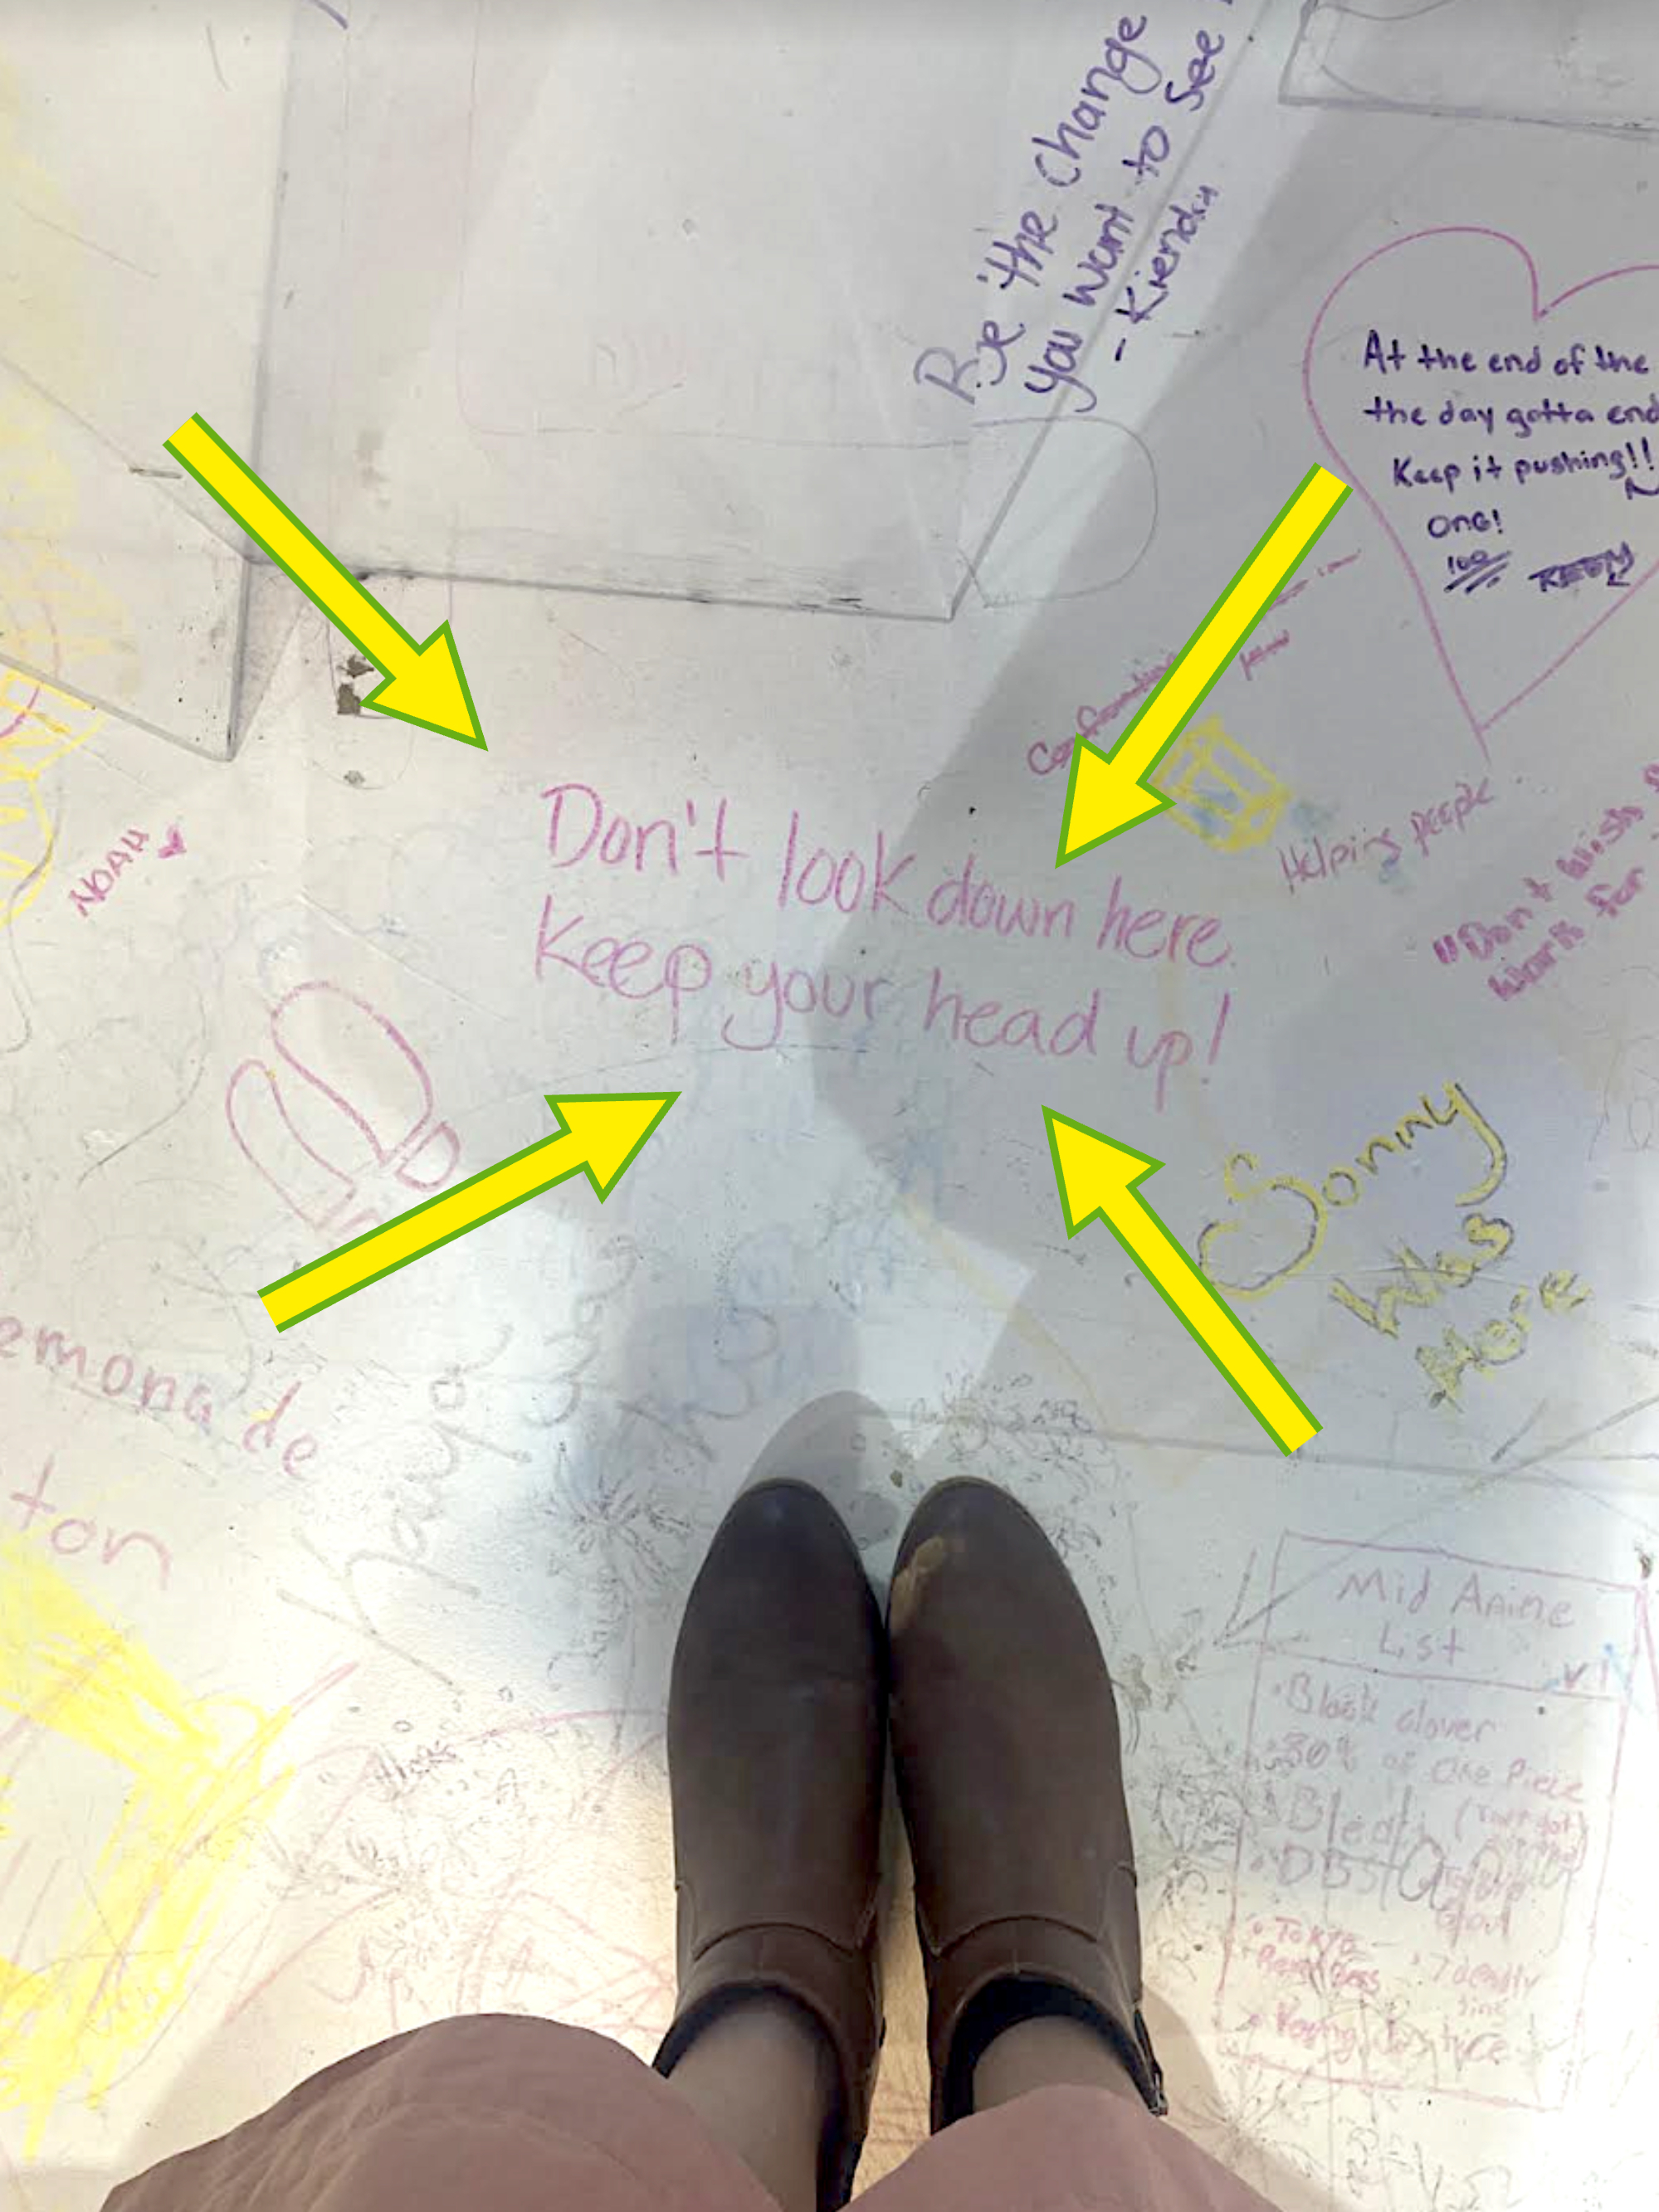 Person standing on a surface covered with positive handwritten messages, including &quot;Don&#x27;t look down here, keep your head up!&quot; and &quot;Be the change you wish to see - Gandhi.&quot;